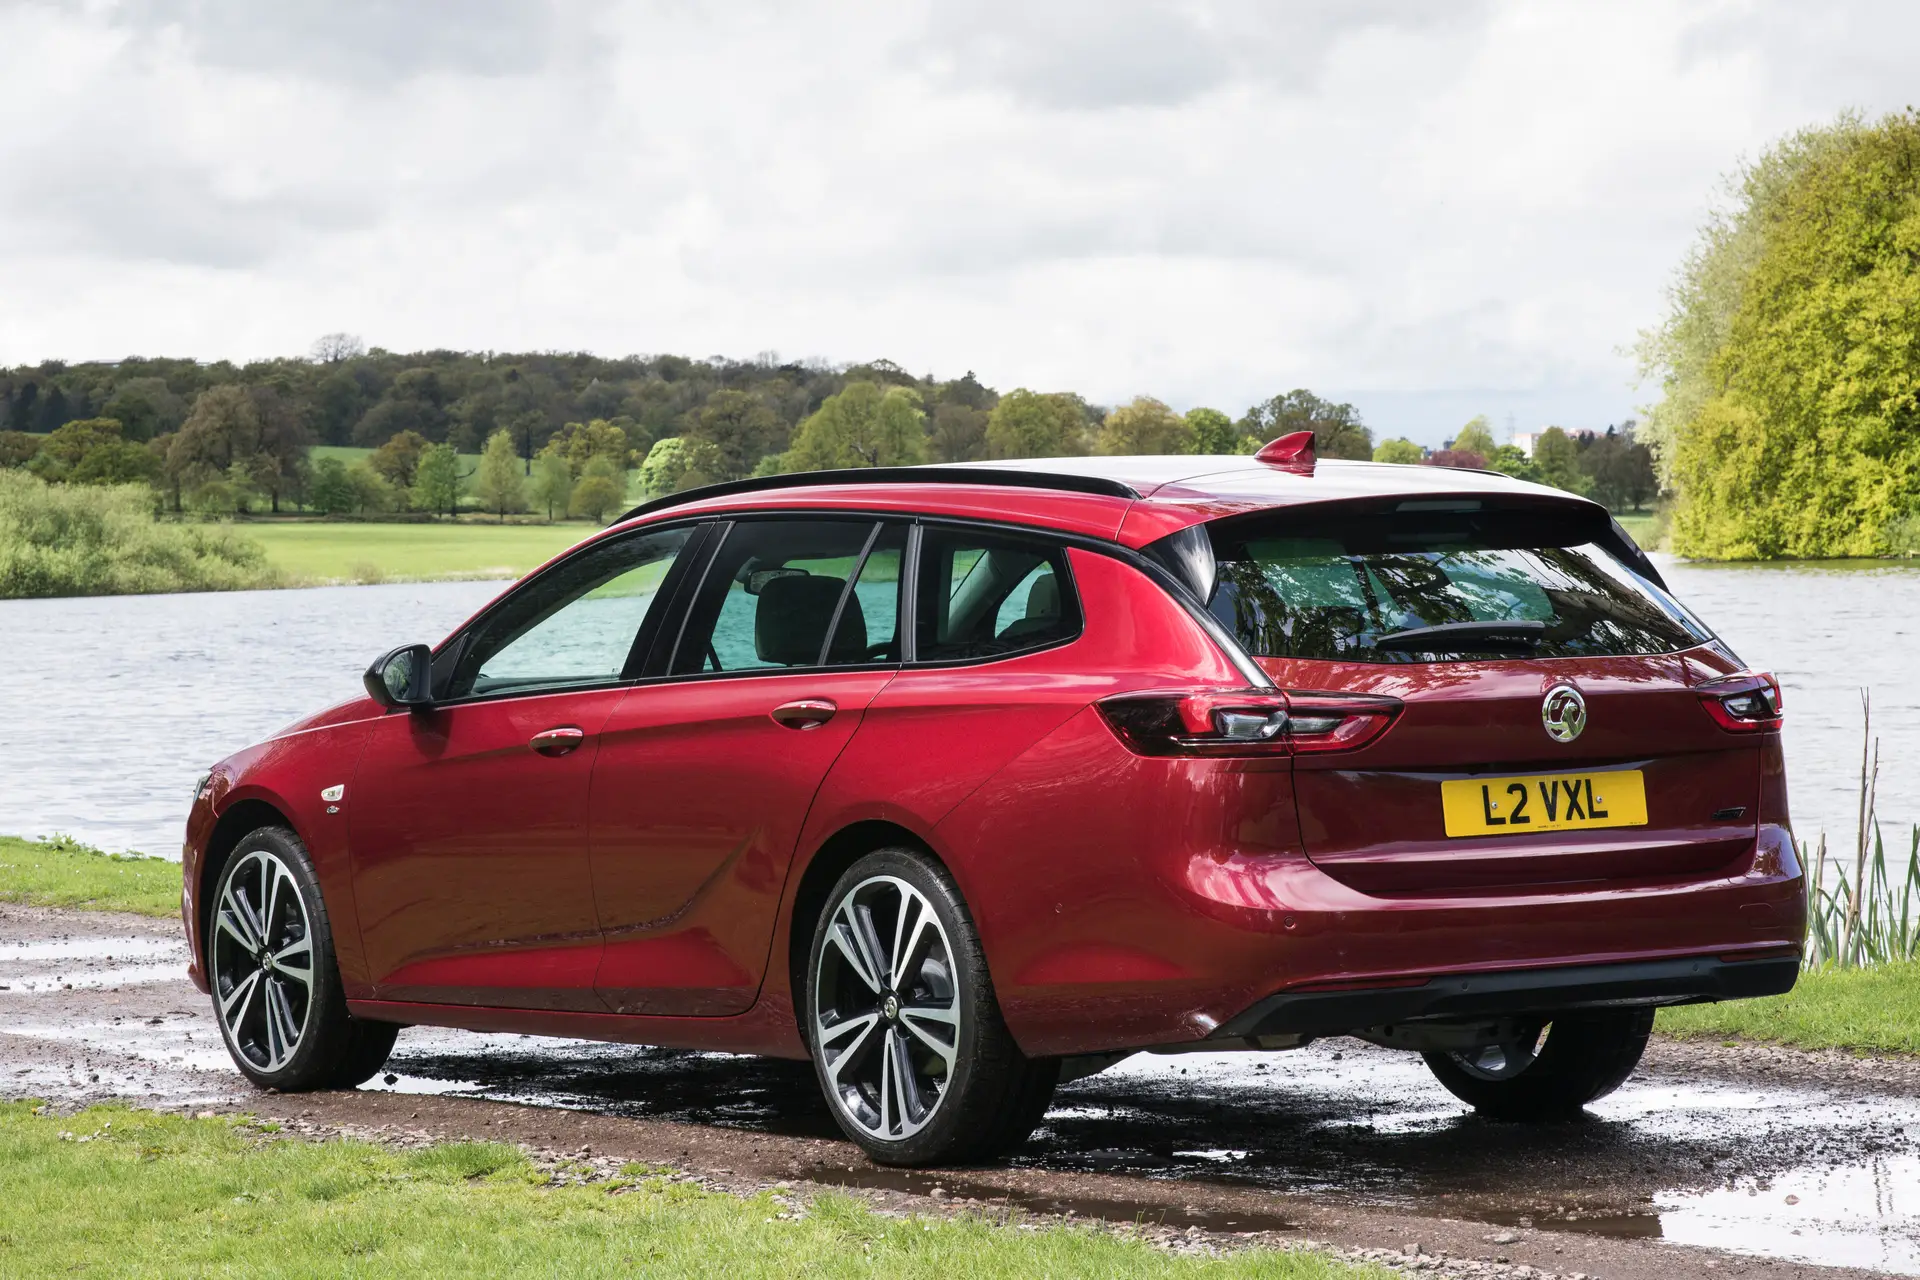 Used Vauxhall Insignia Sports Tourer (2017-2019) Review: exterior rear three quarter photo of the Vauxhall Insignia Sports Tourer